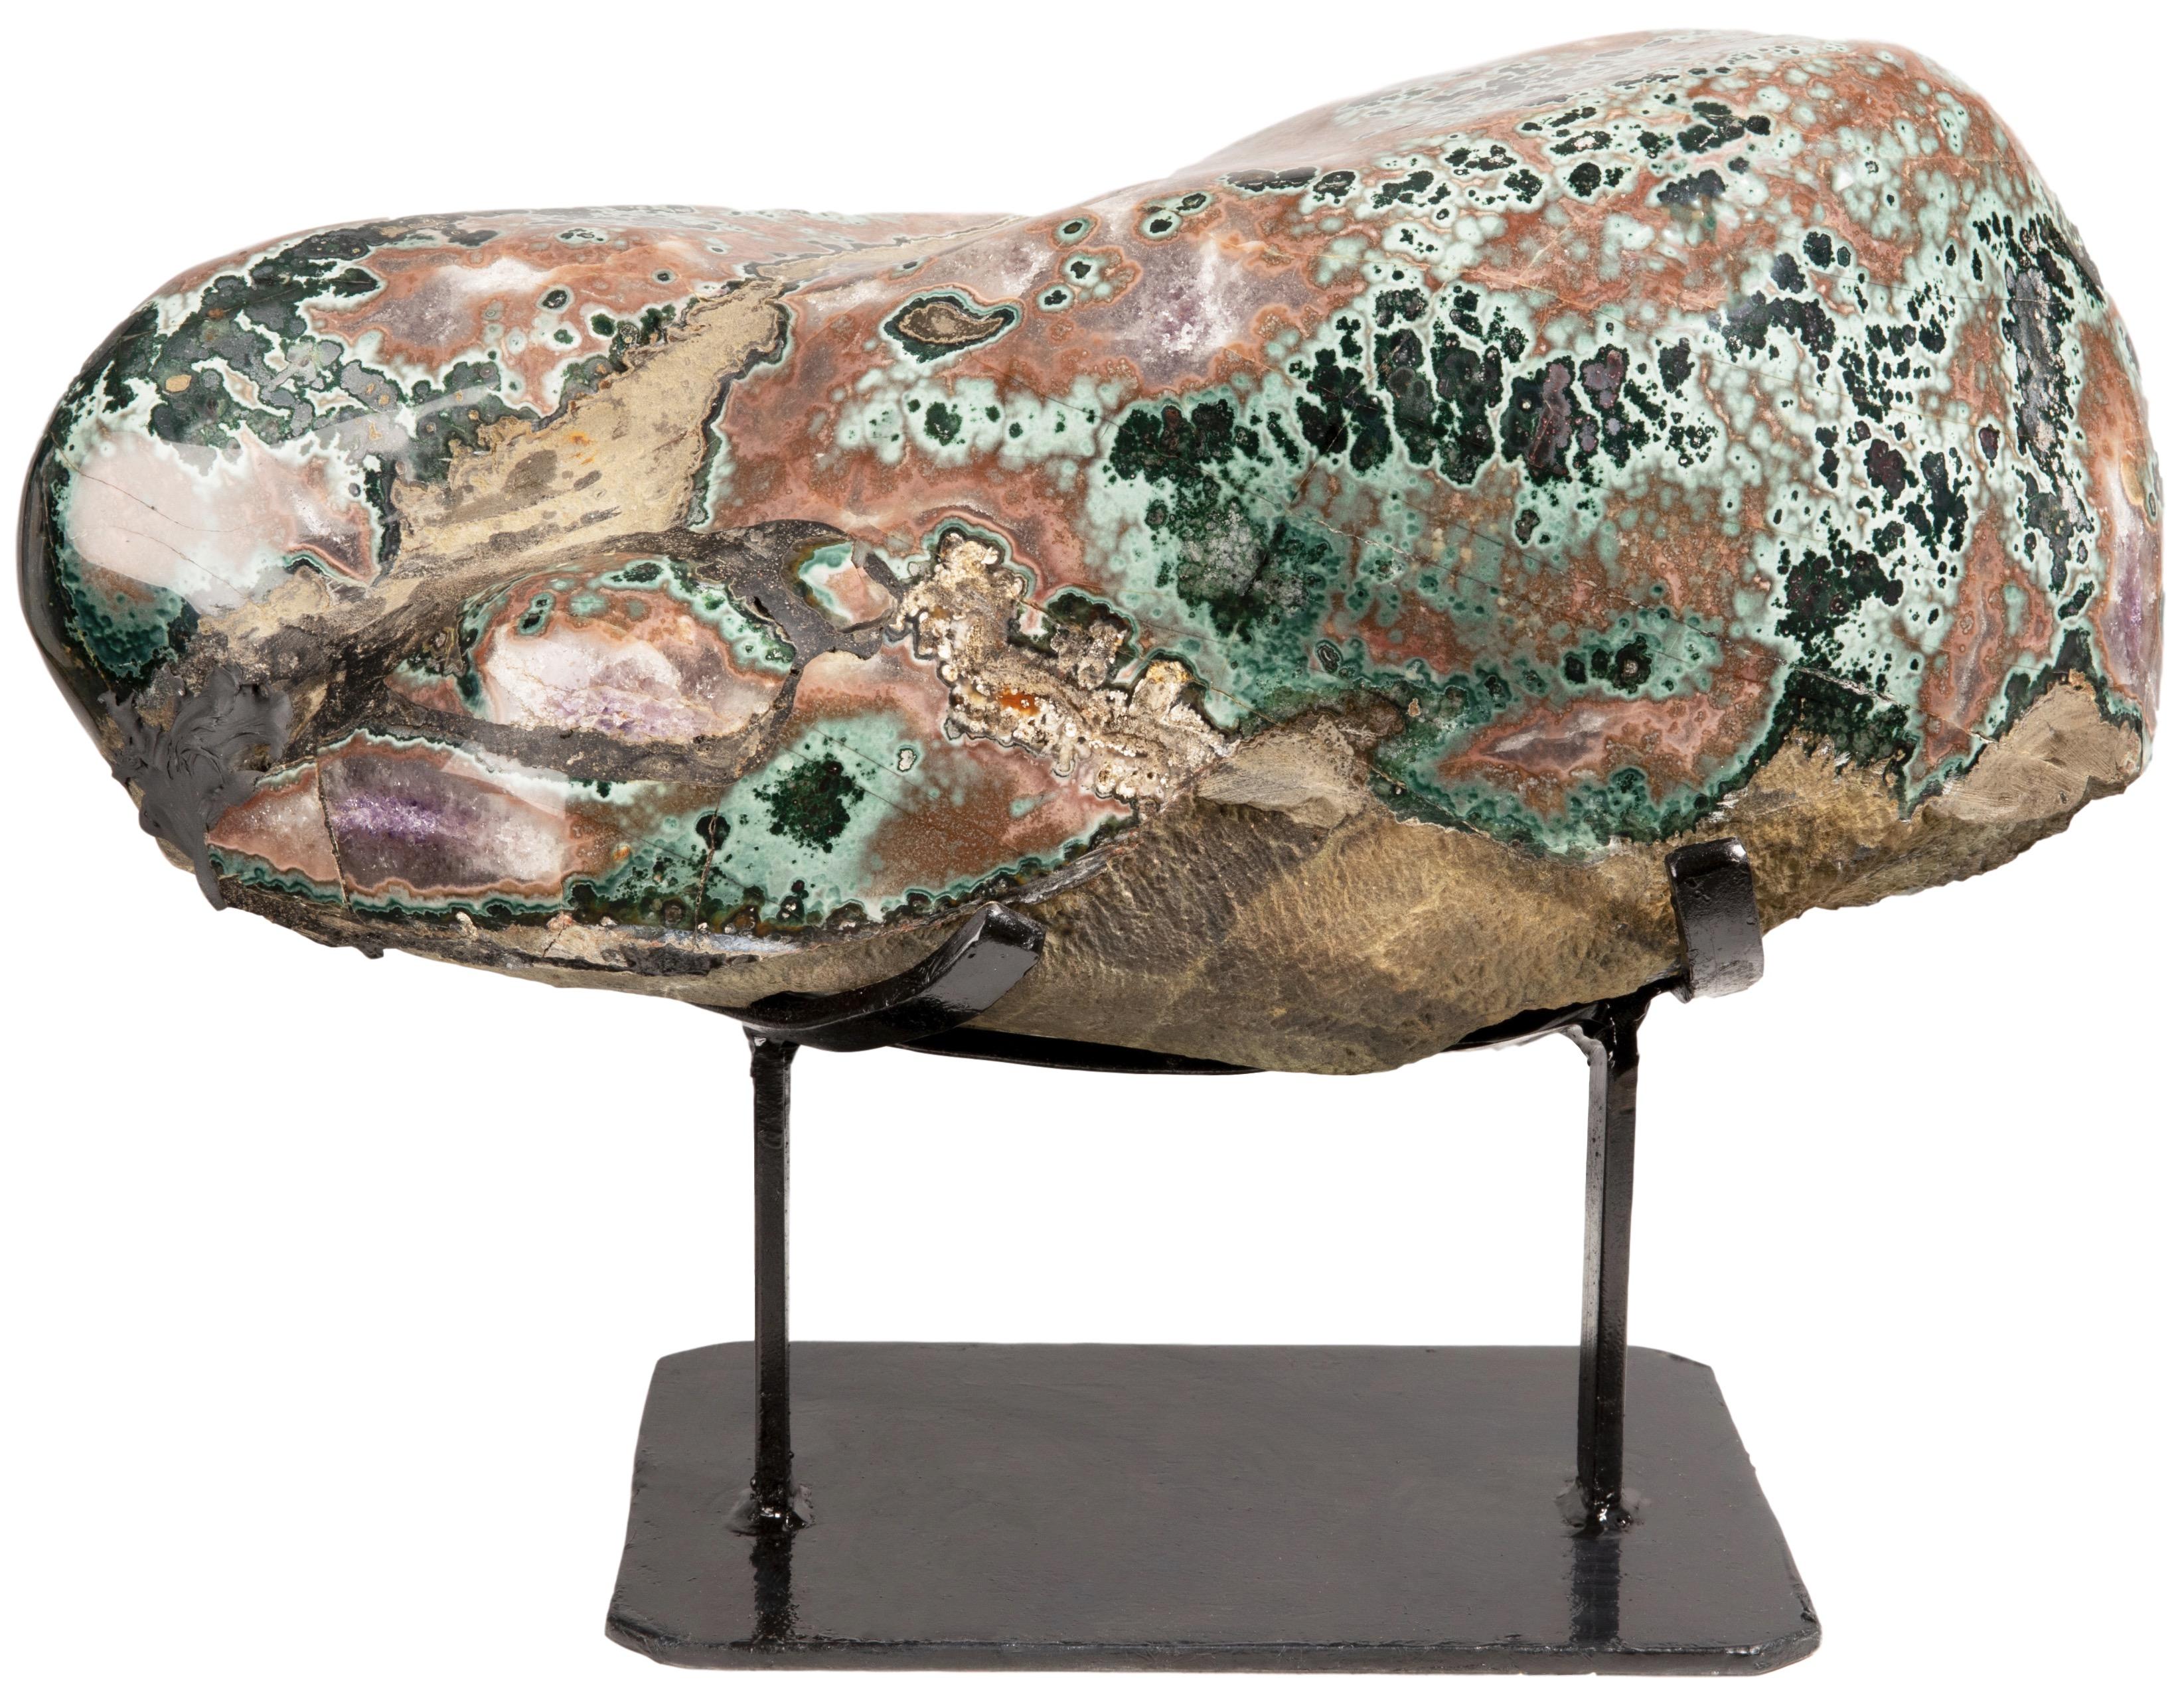 This is an extraordinary half geode with a calcite formation. This piece celebrates the visual phenomenon of the geode interior with some parts of the sculpture being rough basalt, and others showcasing combinations of amethyst, green celadonite,